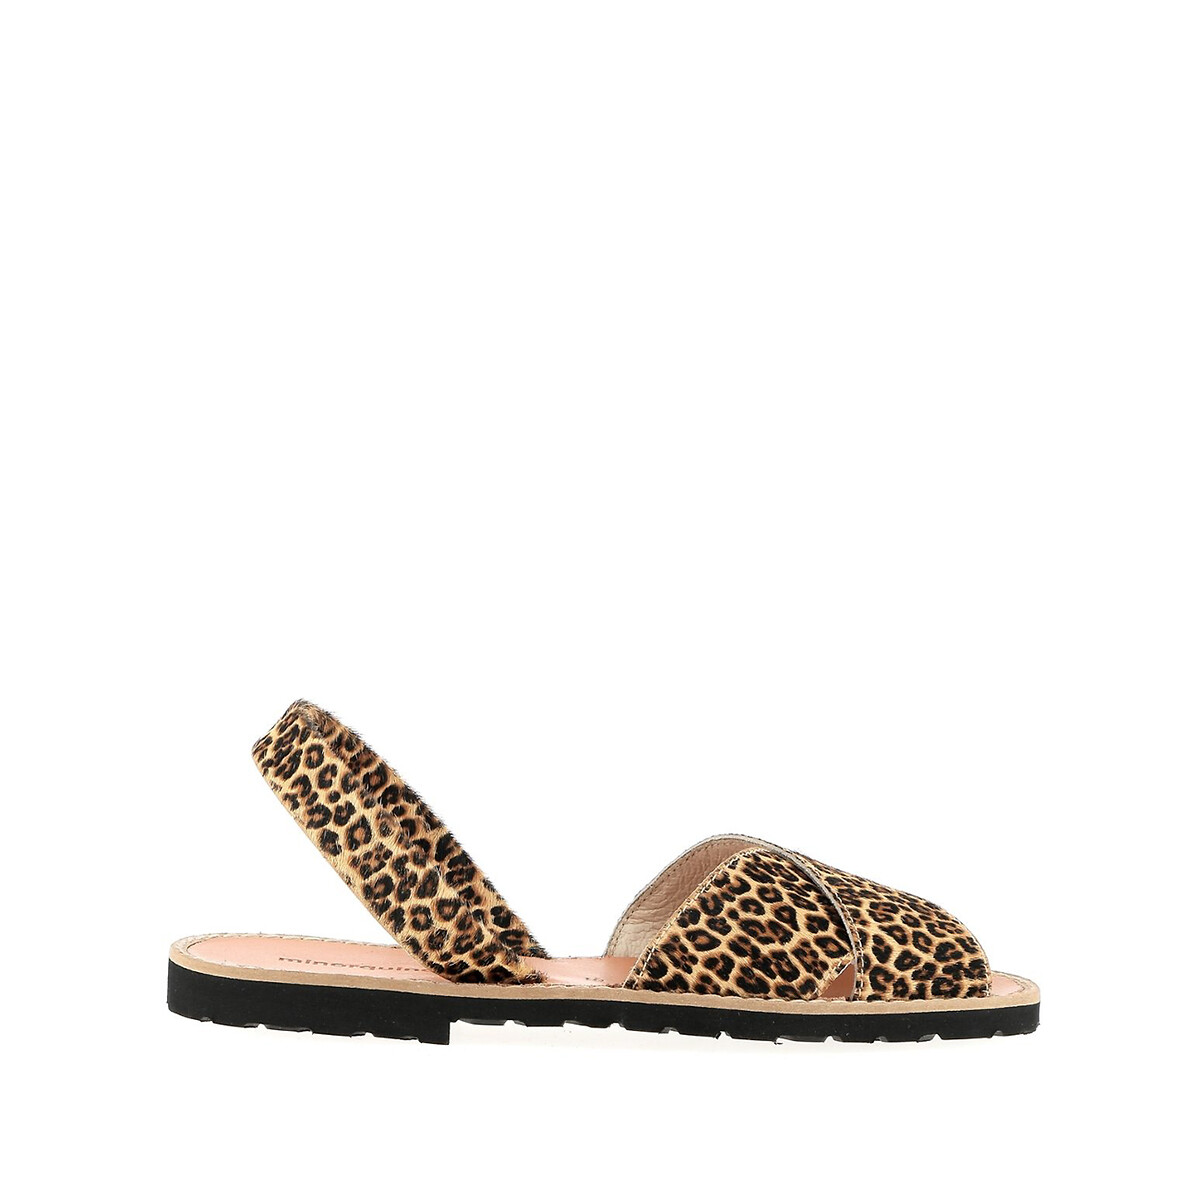 Avarca Cala Leather Sandals in Leopard Print with Flat Heel